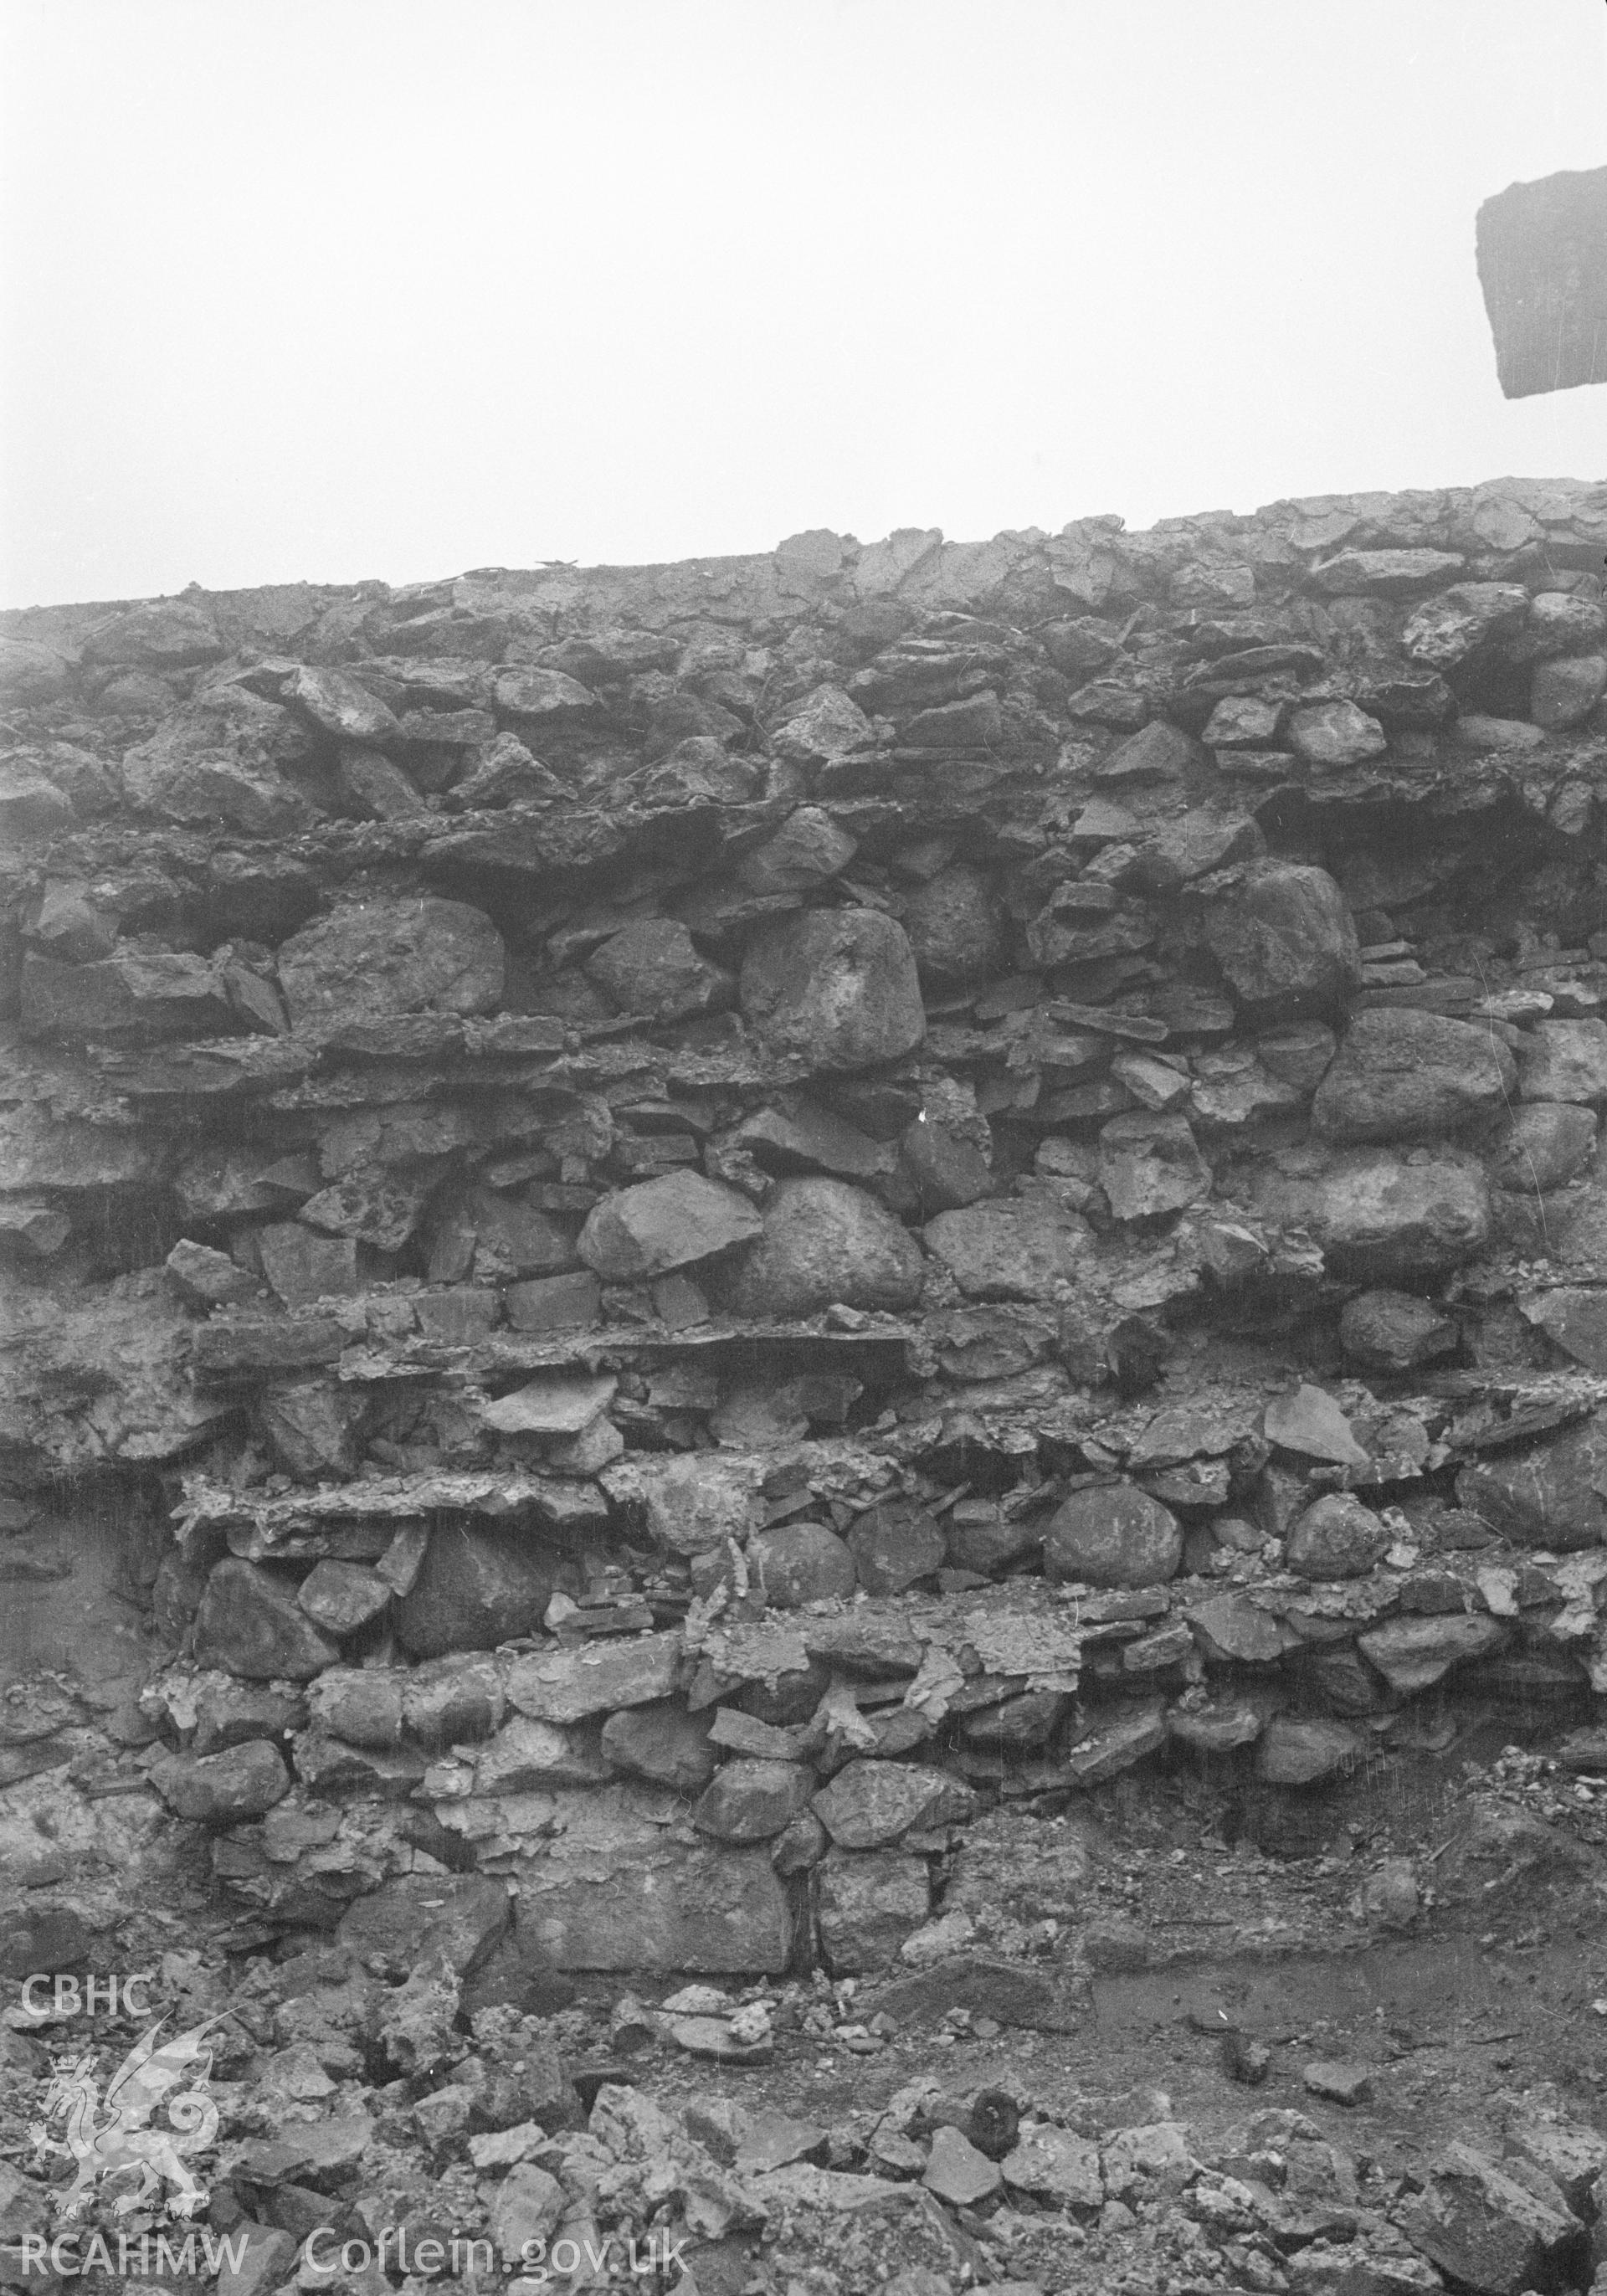 Digital copy of a black and white negative showing Tenby Town Walls.